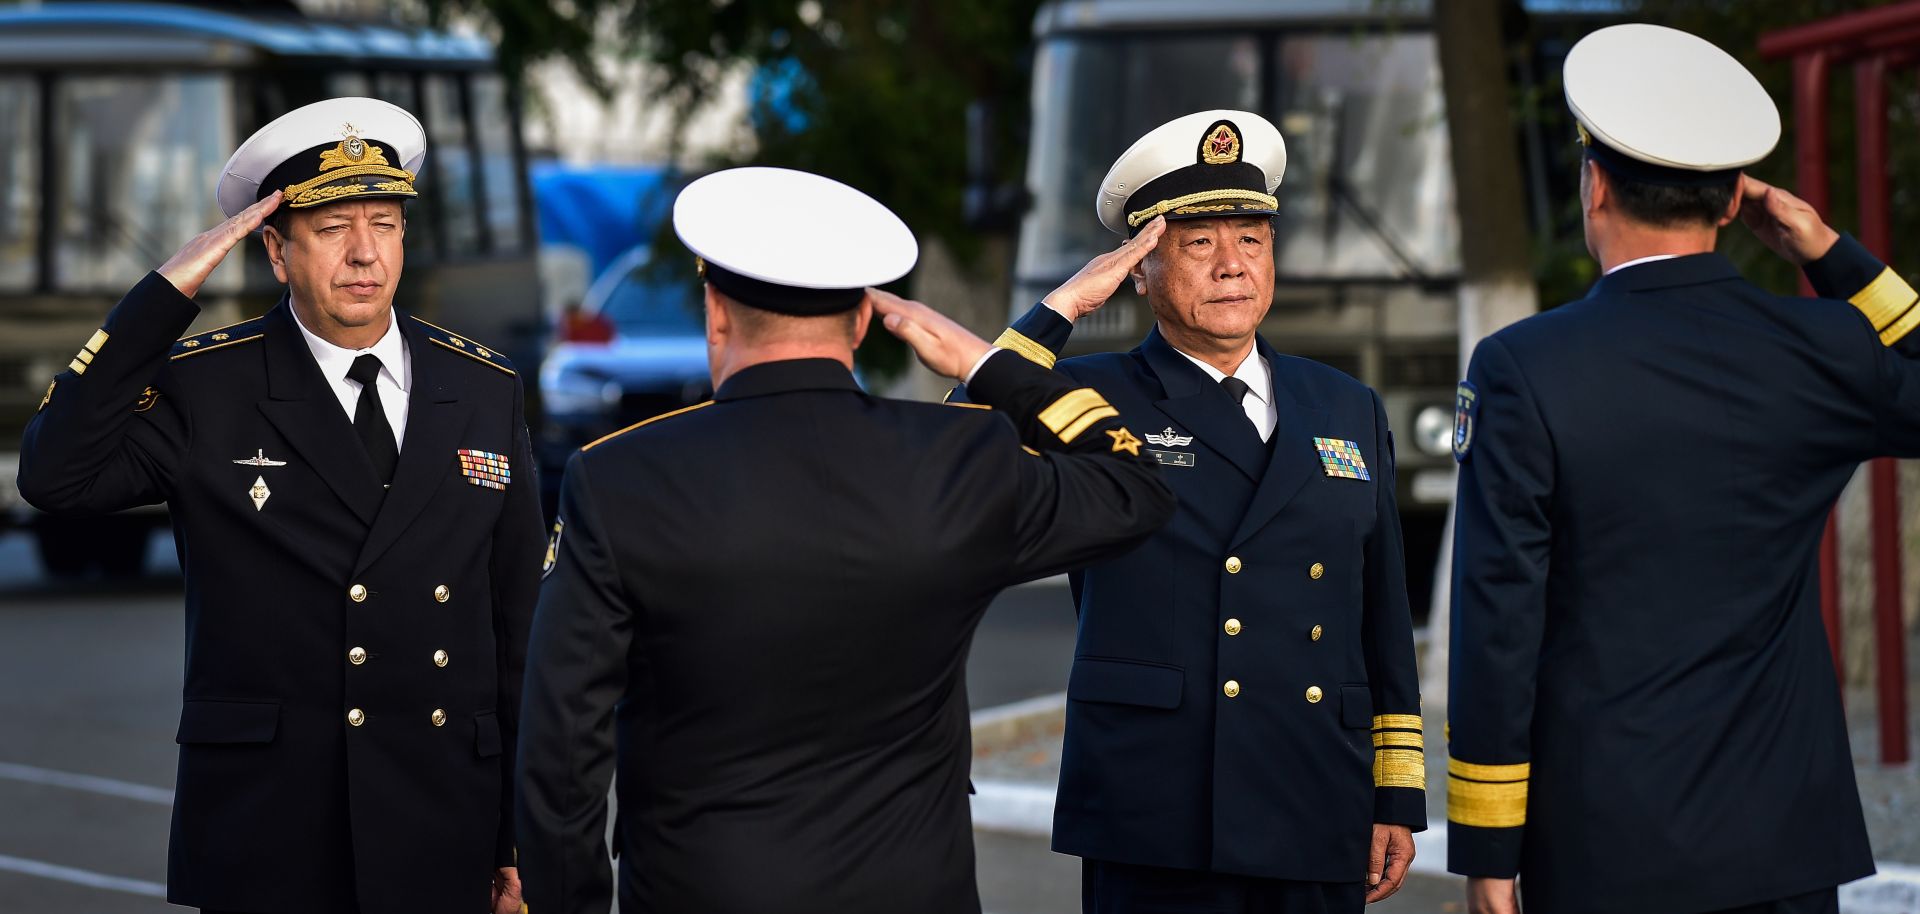 Military officials salute each other in a ceremony before Russia and China warships set out for a naval cooperation exercise.